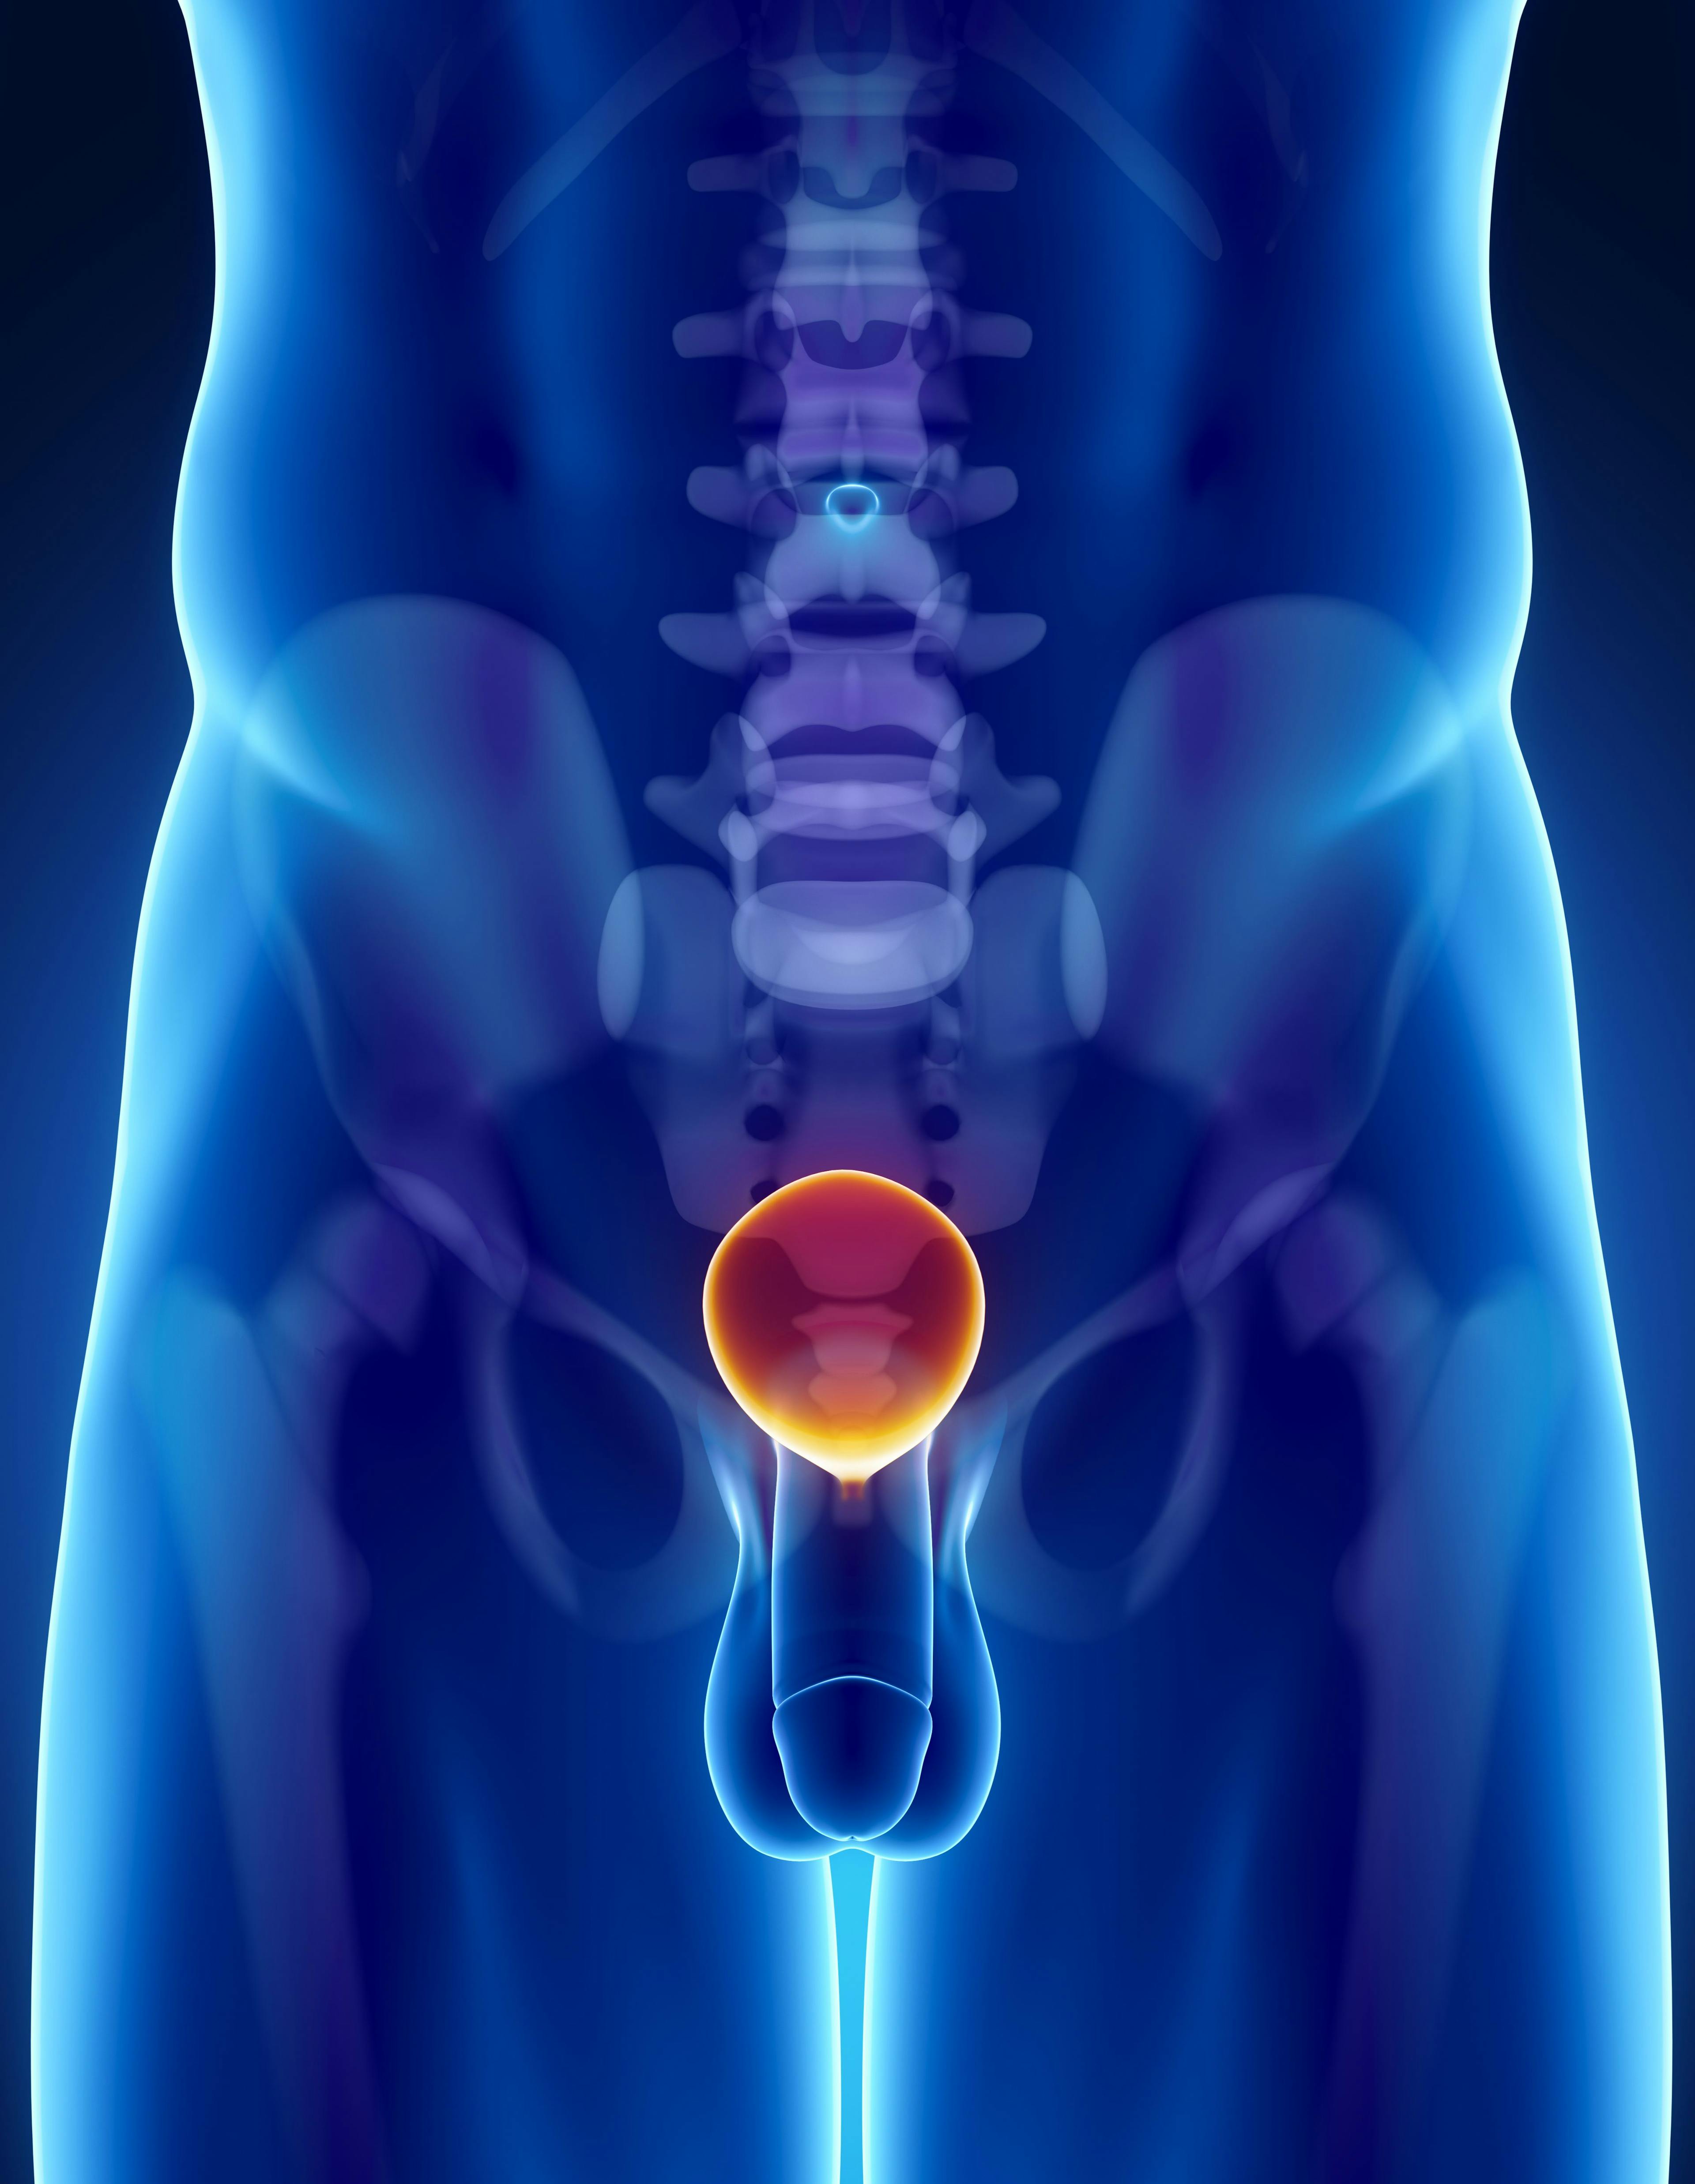 Younger African American Men With Prostate Cancer Show Improved Outcomes With More PSA Screenings